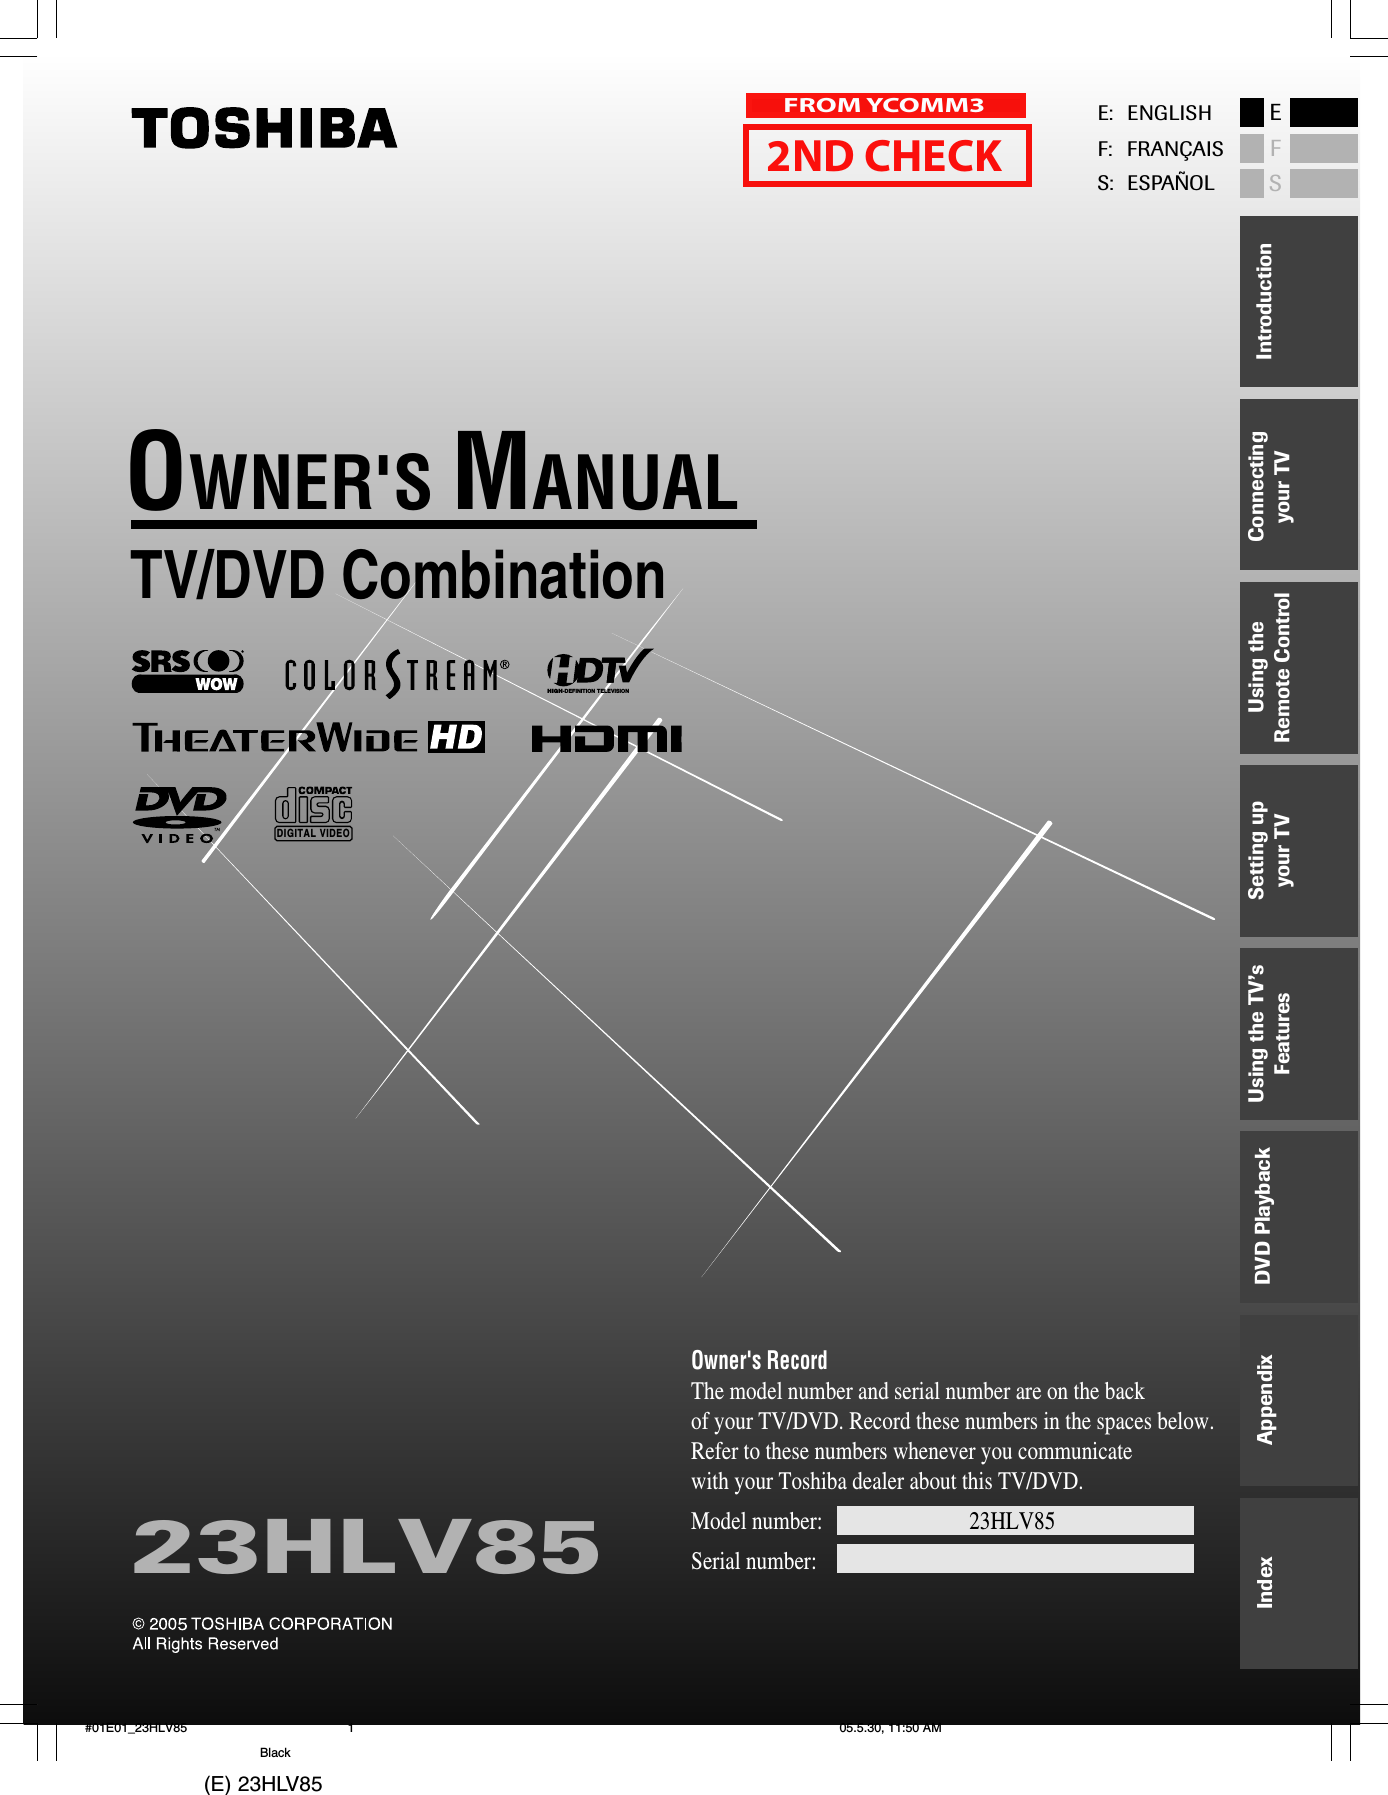 (E) 23HLV85 TV/DVD CombinationOWNER&apos;S MANUAL23HLV85Owner&apos;s RecordThe model number and serial number are on the back of your TV/DVD. Record these numbers in the spaces below. Refer to these numbers whenever you communicate with your Toshiba dealer about this TV/DVD.Model number:              23HLV85                            Serial number:HIGH-DEFINITION TELEVISIONDIGITAL VIDEOE: ENGLISHF: FRANÇAISS: ESPAÑOLESFConnectingyour TVUsing theRemote ControlSetting upyour TVUsing the TV’sFeaturesAppendixIndex IntroductionDVD Playback#01E01_23HLV85 05.5.30, 11:50 AM1Black2ND CHECKFROM YCOMM3